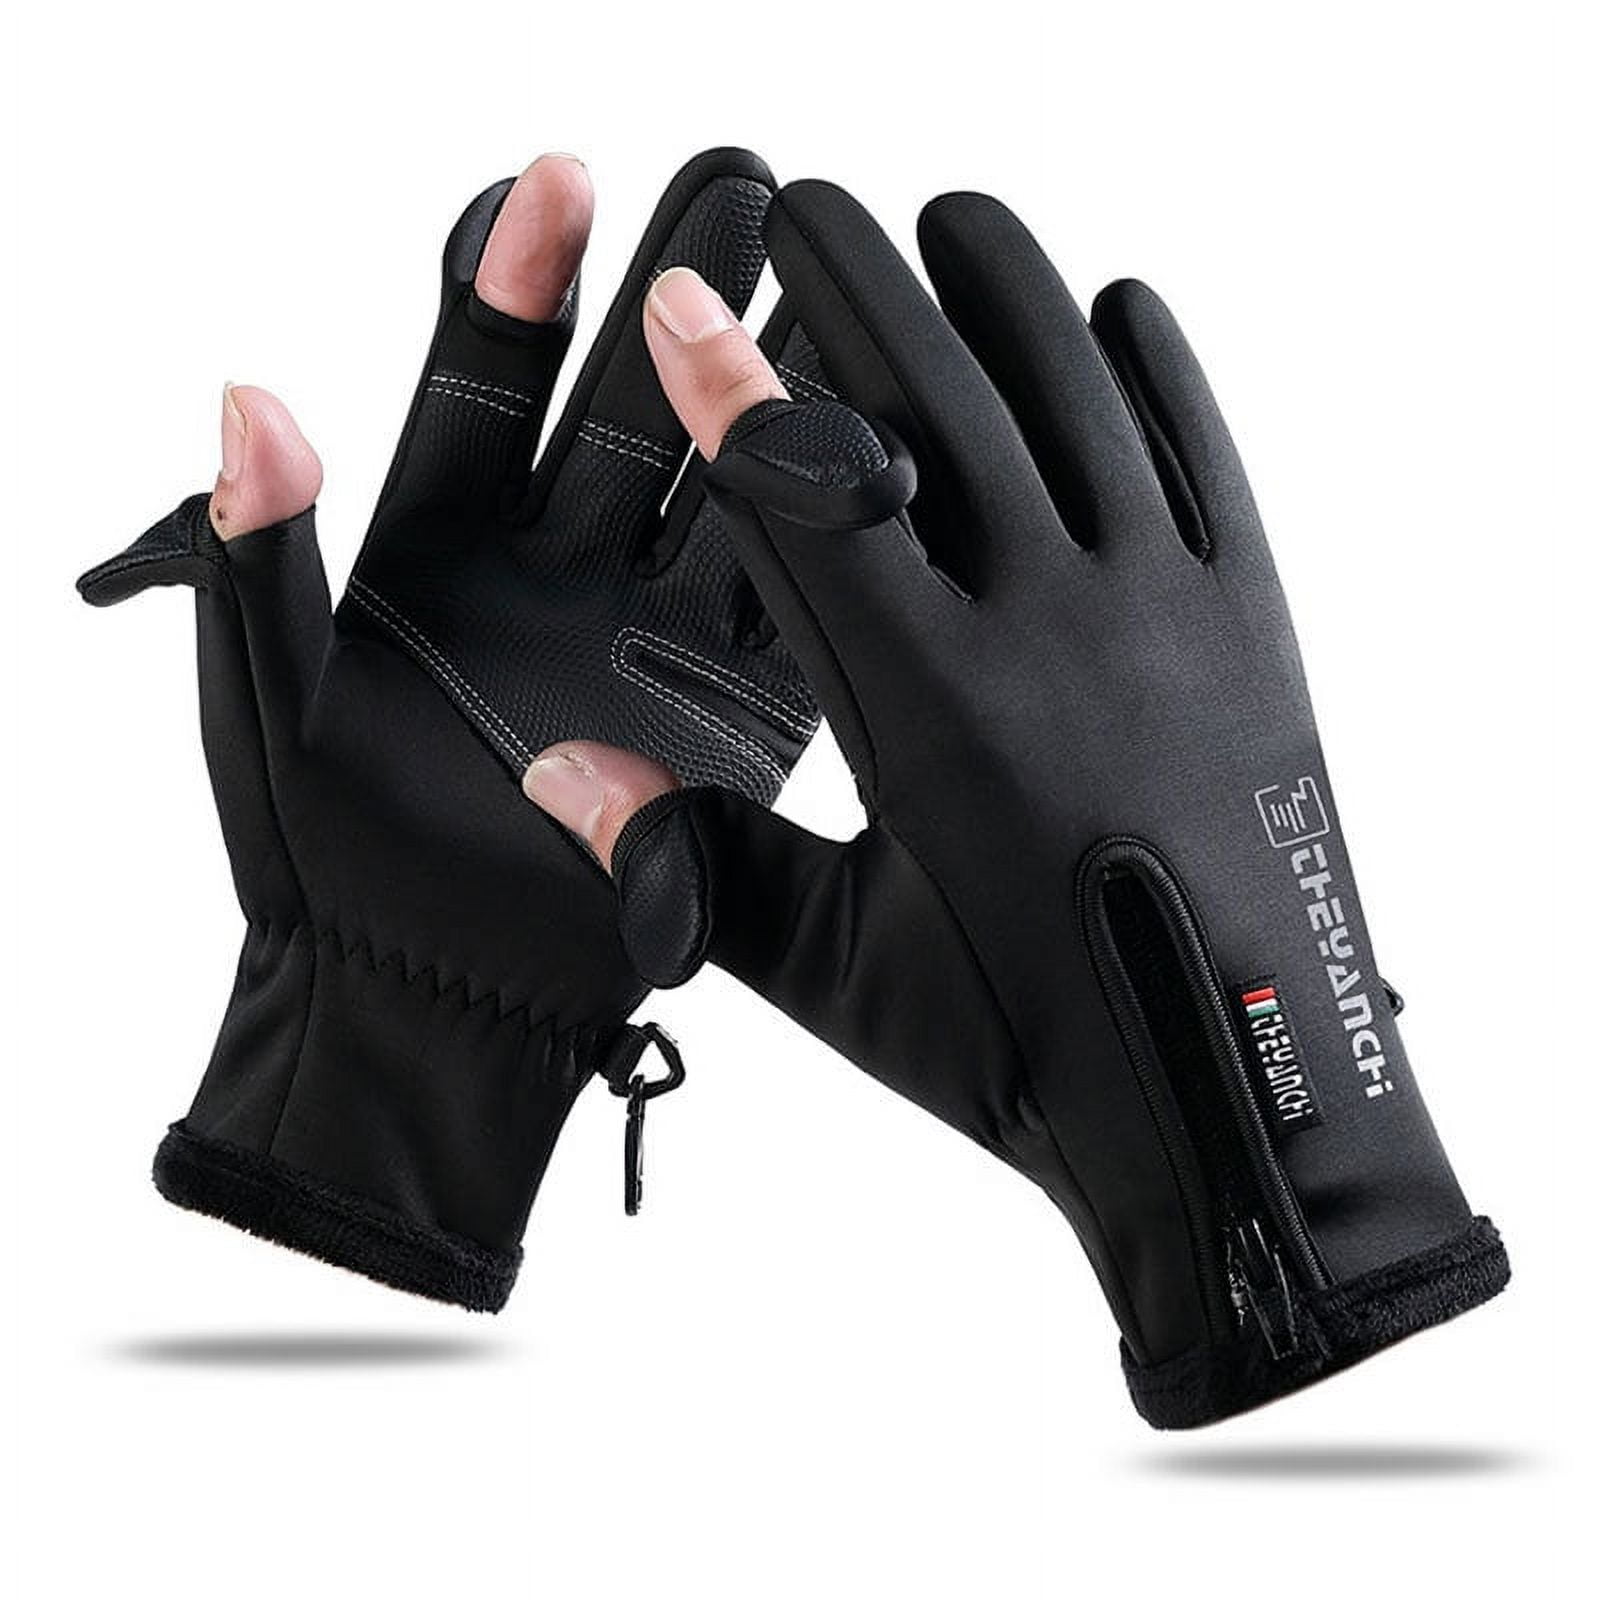 Winter Neoprene Fishing Gloves Anti Slip Fly Fishing Gloves Keep Warm  Outdoor Sports Hiking Driving Gloves Fishing Tool 231228 From Lian09,  $11.01